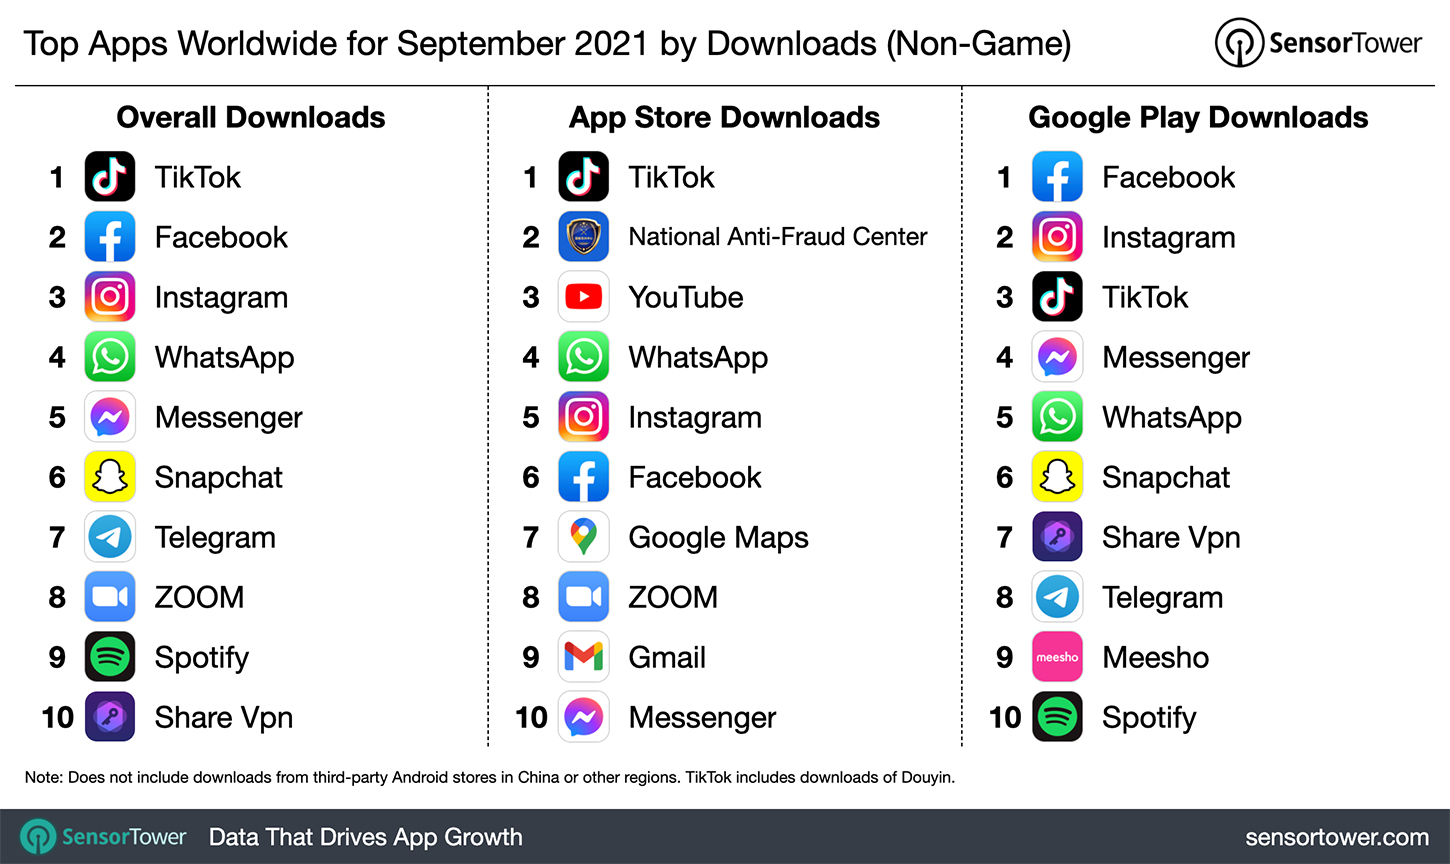 Top Apps Worldwide for September 2021 by Downloads